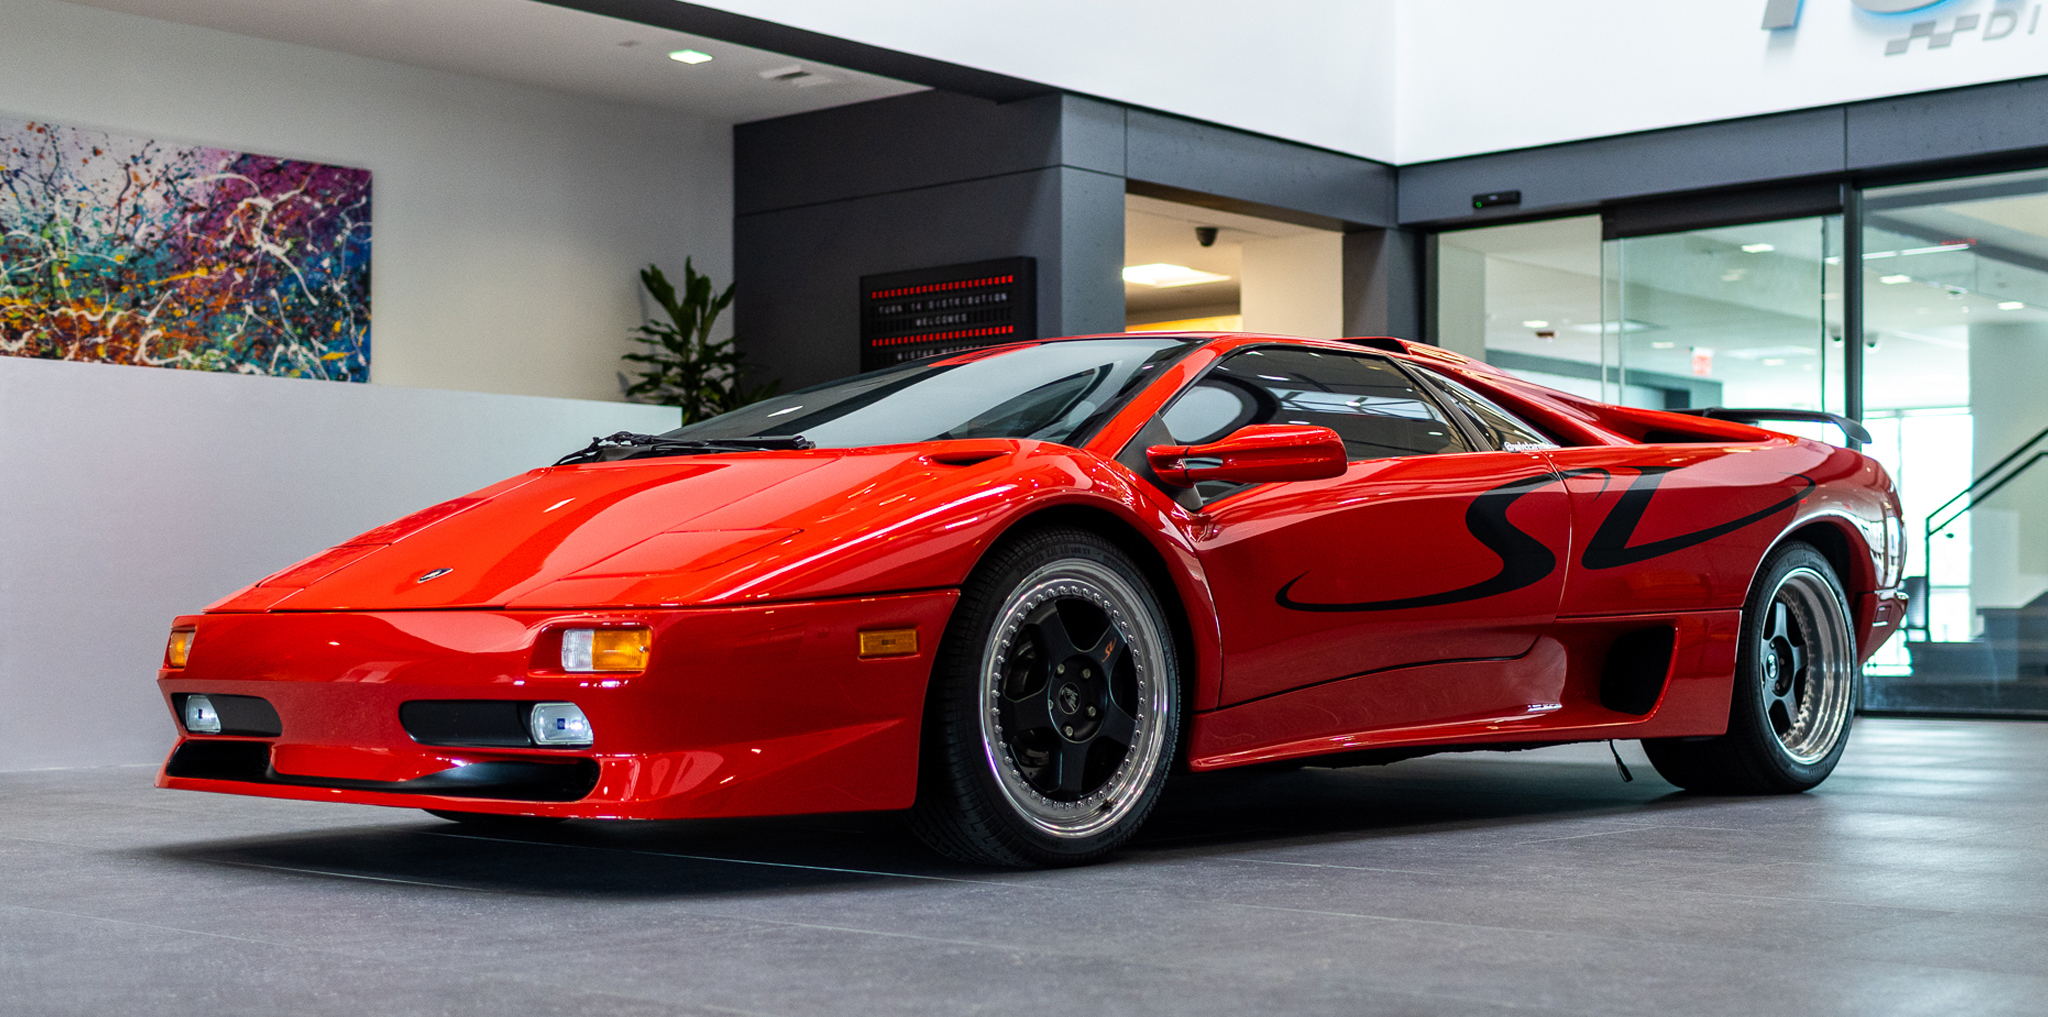 Bull on Parade: A Lamborghini Diablo SV Adds an Exotic Flavor to T14 HQ